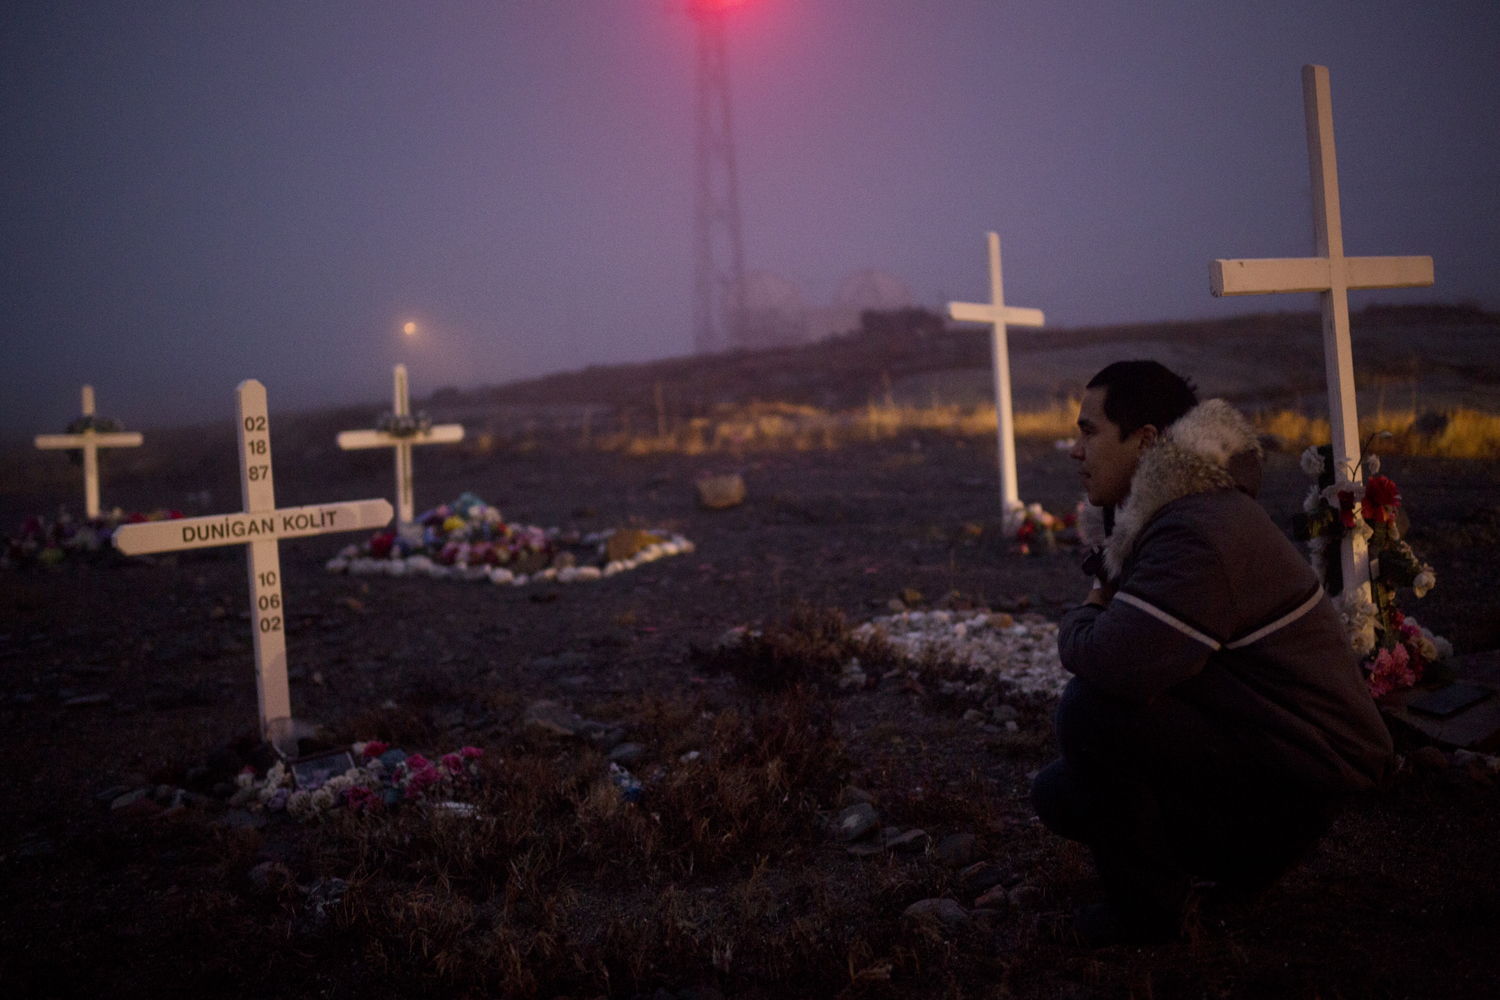 RANKIN INLET, CANADA - OCTOBER 12 Brian Tagalik, 28, visits the grave of his friend Dunigan Kolit, who killed himself when he was 15-years-old, in Rankin Inlet, Canada on Oct. 12, 2013. The two played hockey together as teenagers. Brian says that he “truly believes Dunigan is one of those guys who doesn’t know he’s dead yet, because he was so full of life.” According to Brian, Dunigan’s grandparents raised him because his mother was an alcoholic. As Brian walks throughout the cemetery, he points out the graves of almost a dozen of his friends who died of suicide. According to Health Canada, the incidences of suicide in Inuit youth are among the highest in the world, 11 times the national average. Brian grew up with many of his friends taking their lives. He says, “if I get a phone call at any point in the morning before eleven, I know it’s someone telling me another friend has died. I got rid of my phone, because I just don’t want to know anymore.” At points in time, Brian has considered taking his own life. Since then, Brian has become an activist, trying to break the silence and speak out about taboo topics that Inuit youth face. He tries to share his own story, and counsel people at risk of suicide. Earlier this year, he recorded a song called “The Struggle” with fellow musician Kelly Fraser, which speaks to their shared experience with suicide and the harsh social realities of living in the arctic. The song, released on local radio stations and online, resonates with many Inuit youth. (Ed Ou/Reportage by Getty Images)https://soundcloud.com/user248977338/the-struggle-feat-kelly-fraser